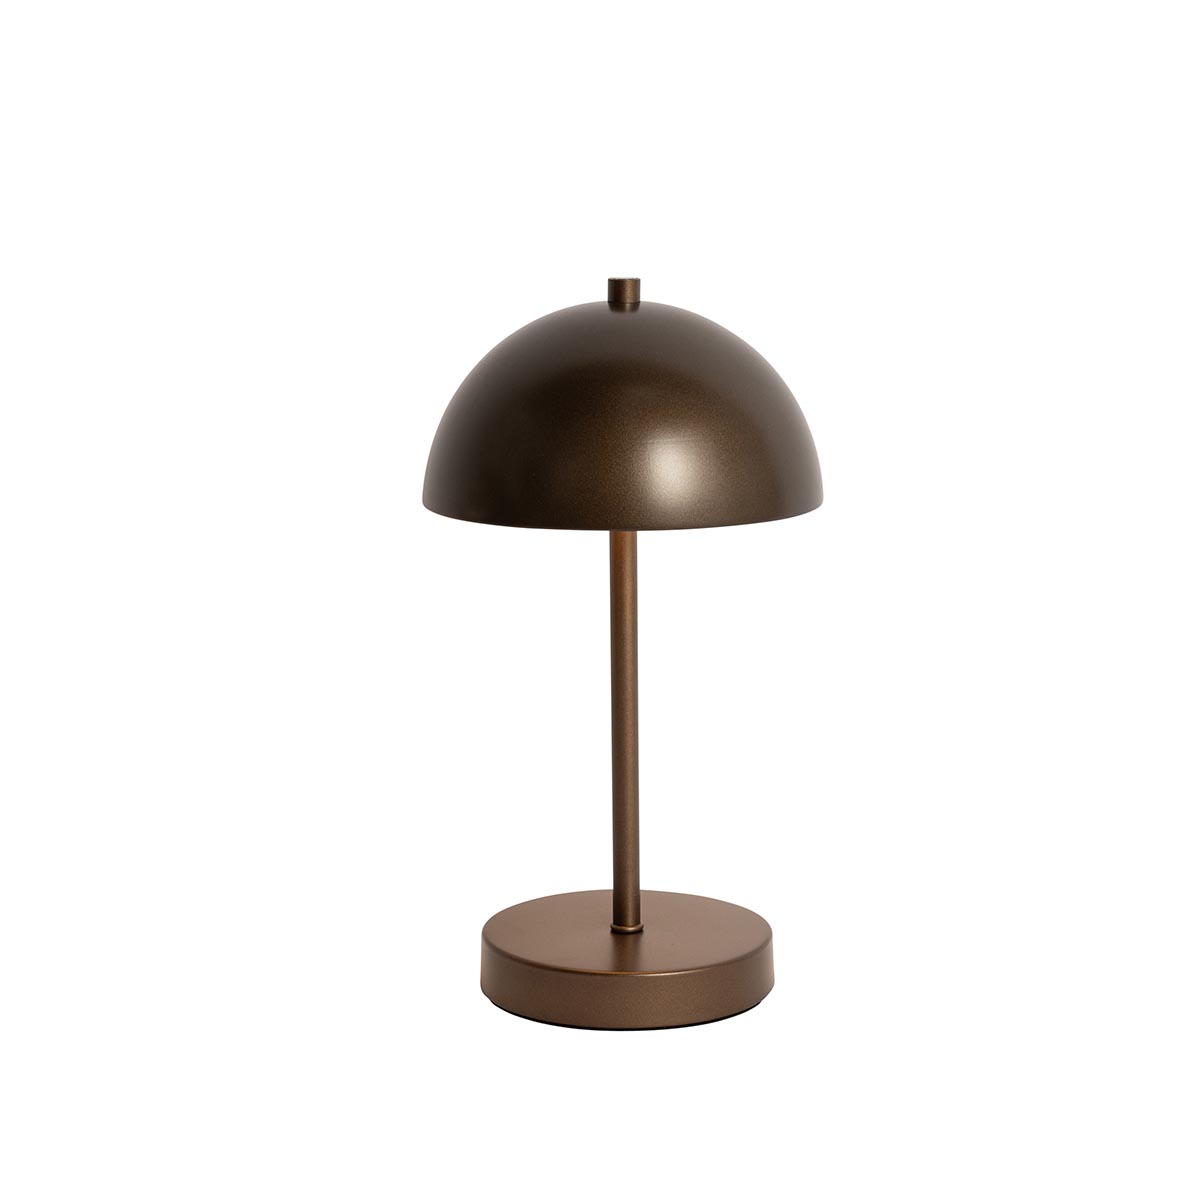 Eclairage dimmable tableau LED bronze, or ou gris 4W 180mm